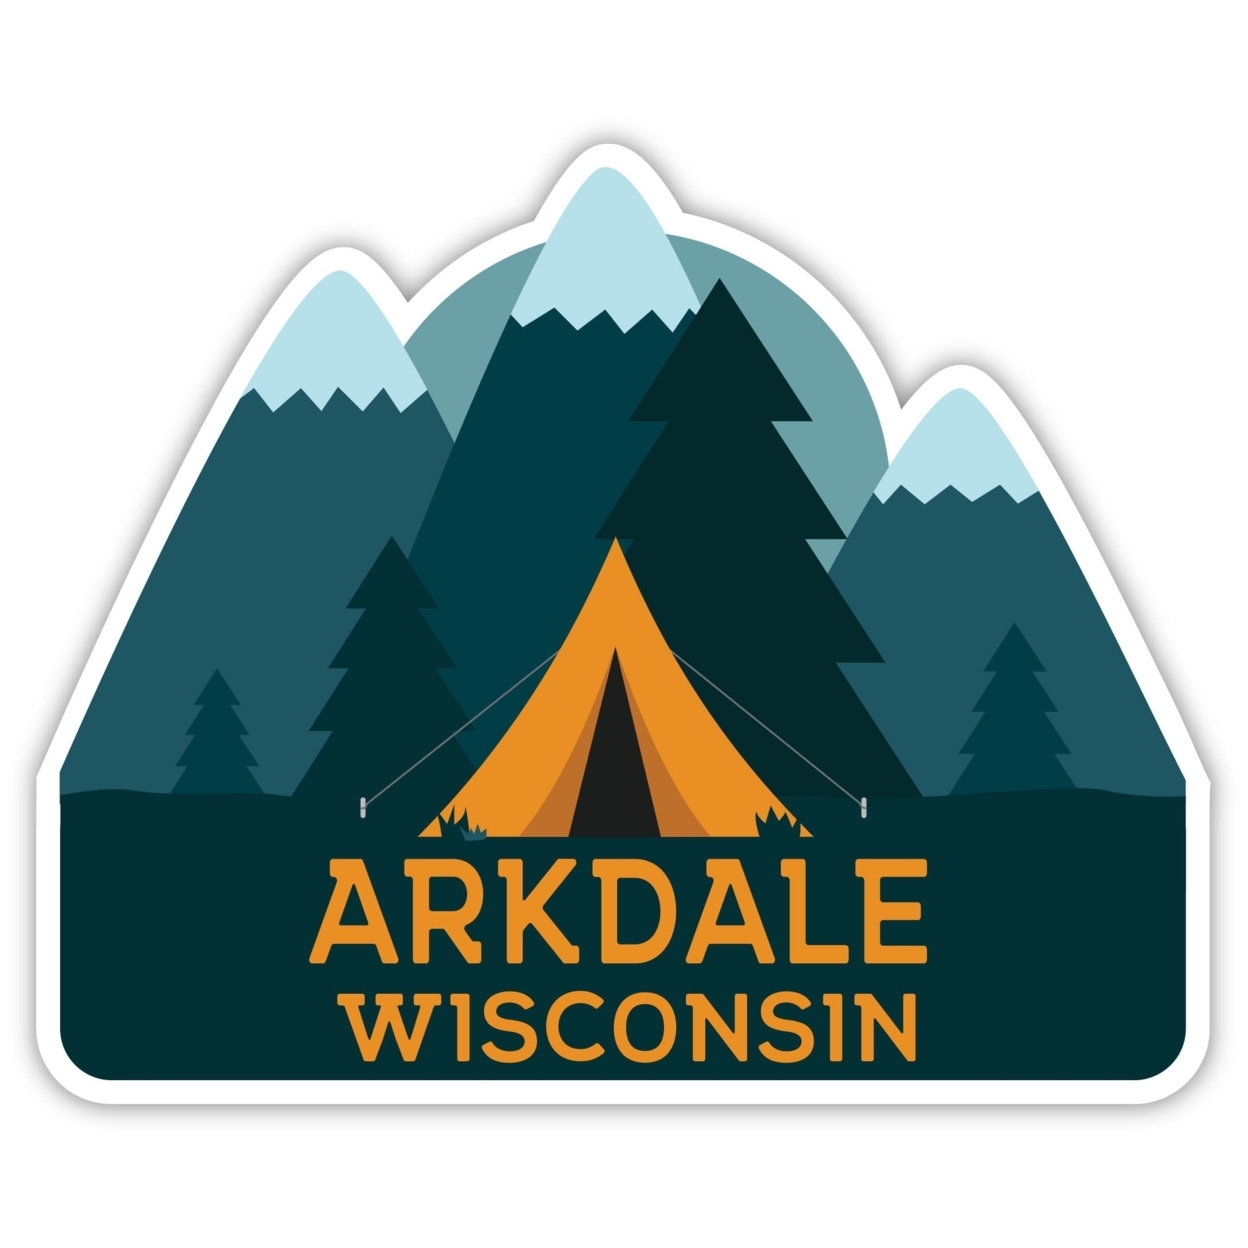 Arkdale Wisconsin Souvenir Decorative Stickers (Choose Theme And Size) - Single Unit, 6-Inch, Bear